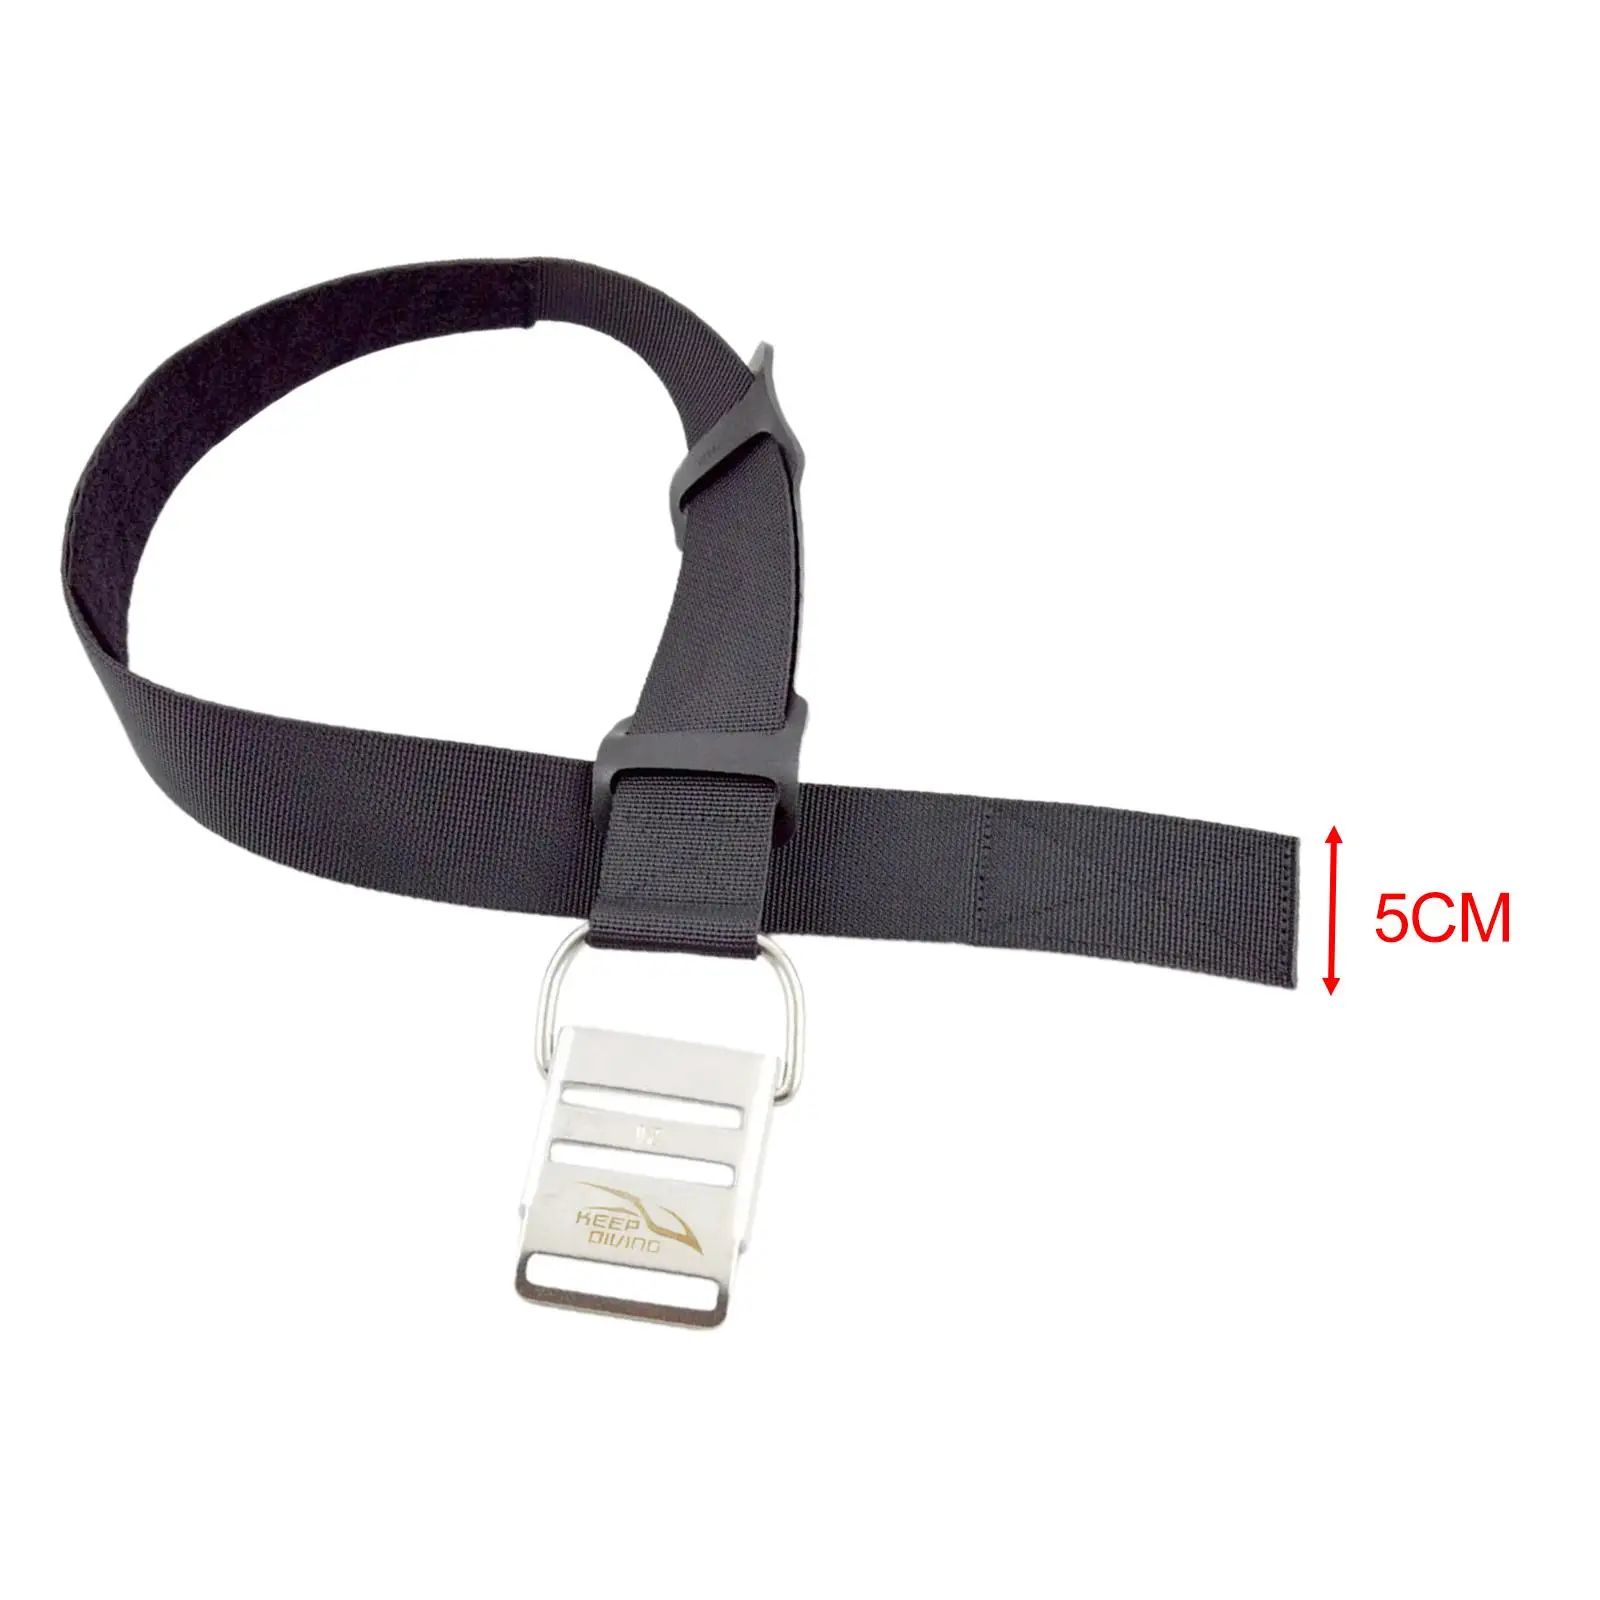 Scuba Diving Tank Strap Easy to Use with Non Slip Pad Dive Tank Strap for Underwater Sports Freediving Snorkeling Swimming